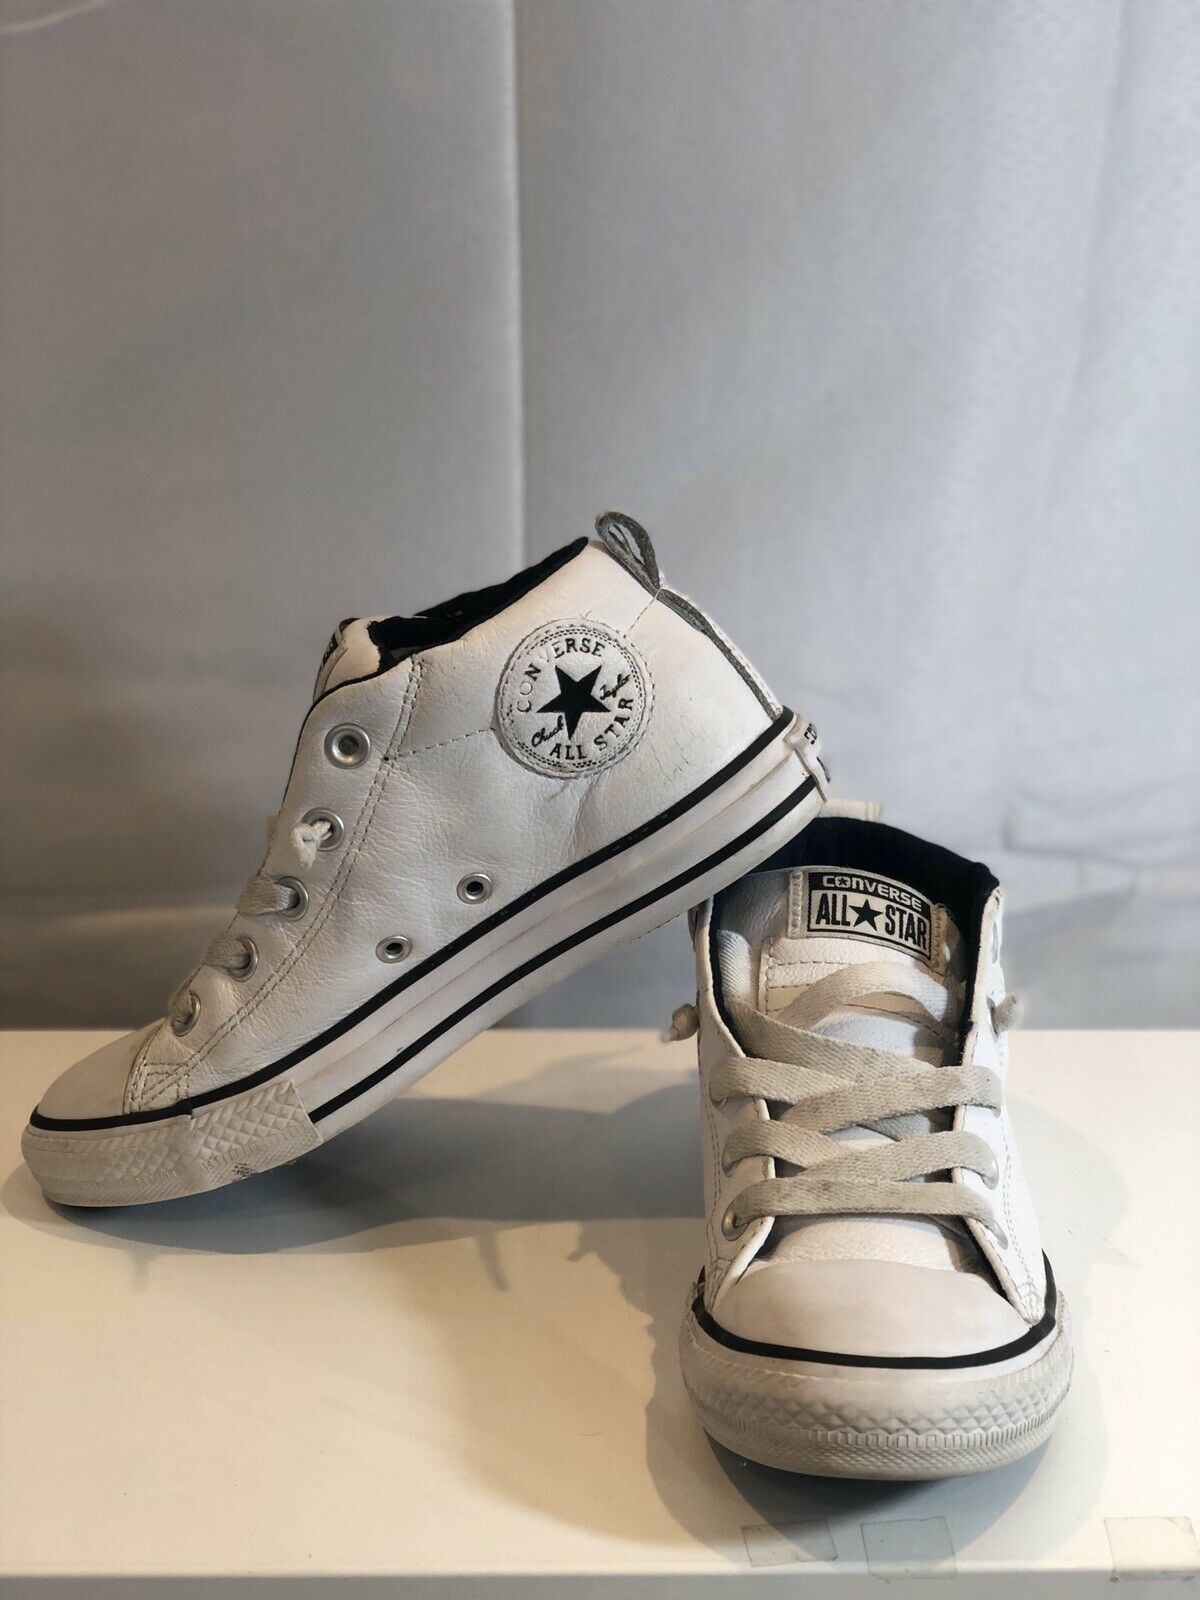 White Leather High Top Converse Junior Size 3 - Unisex Shoes